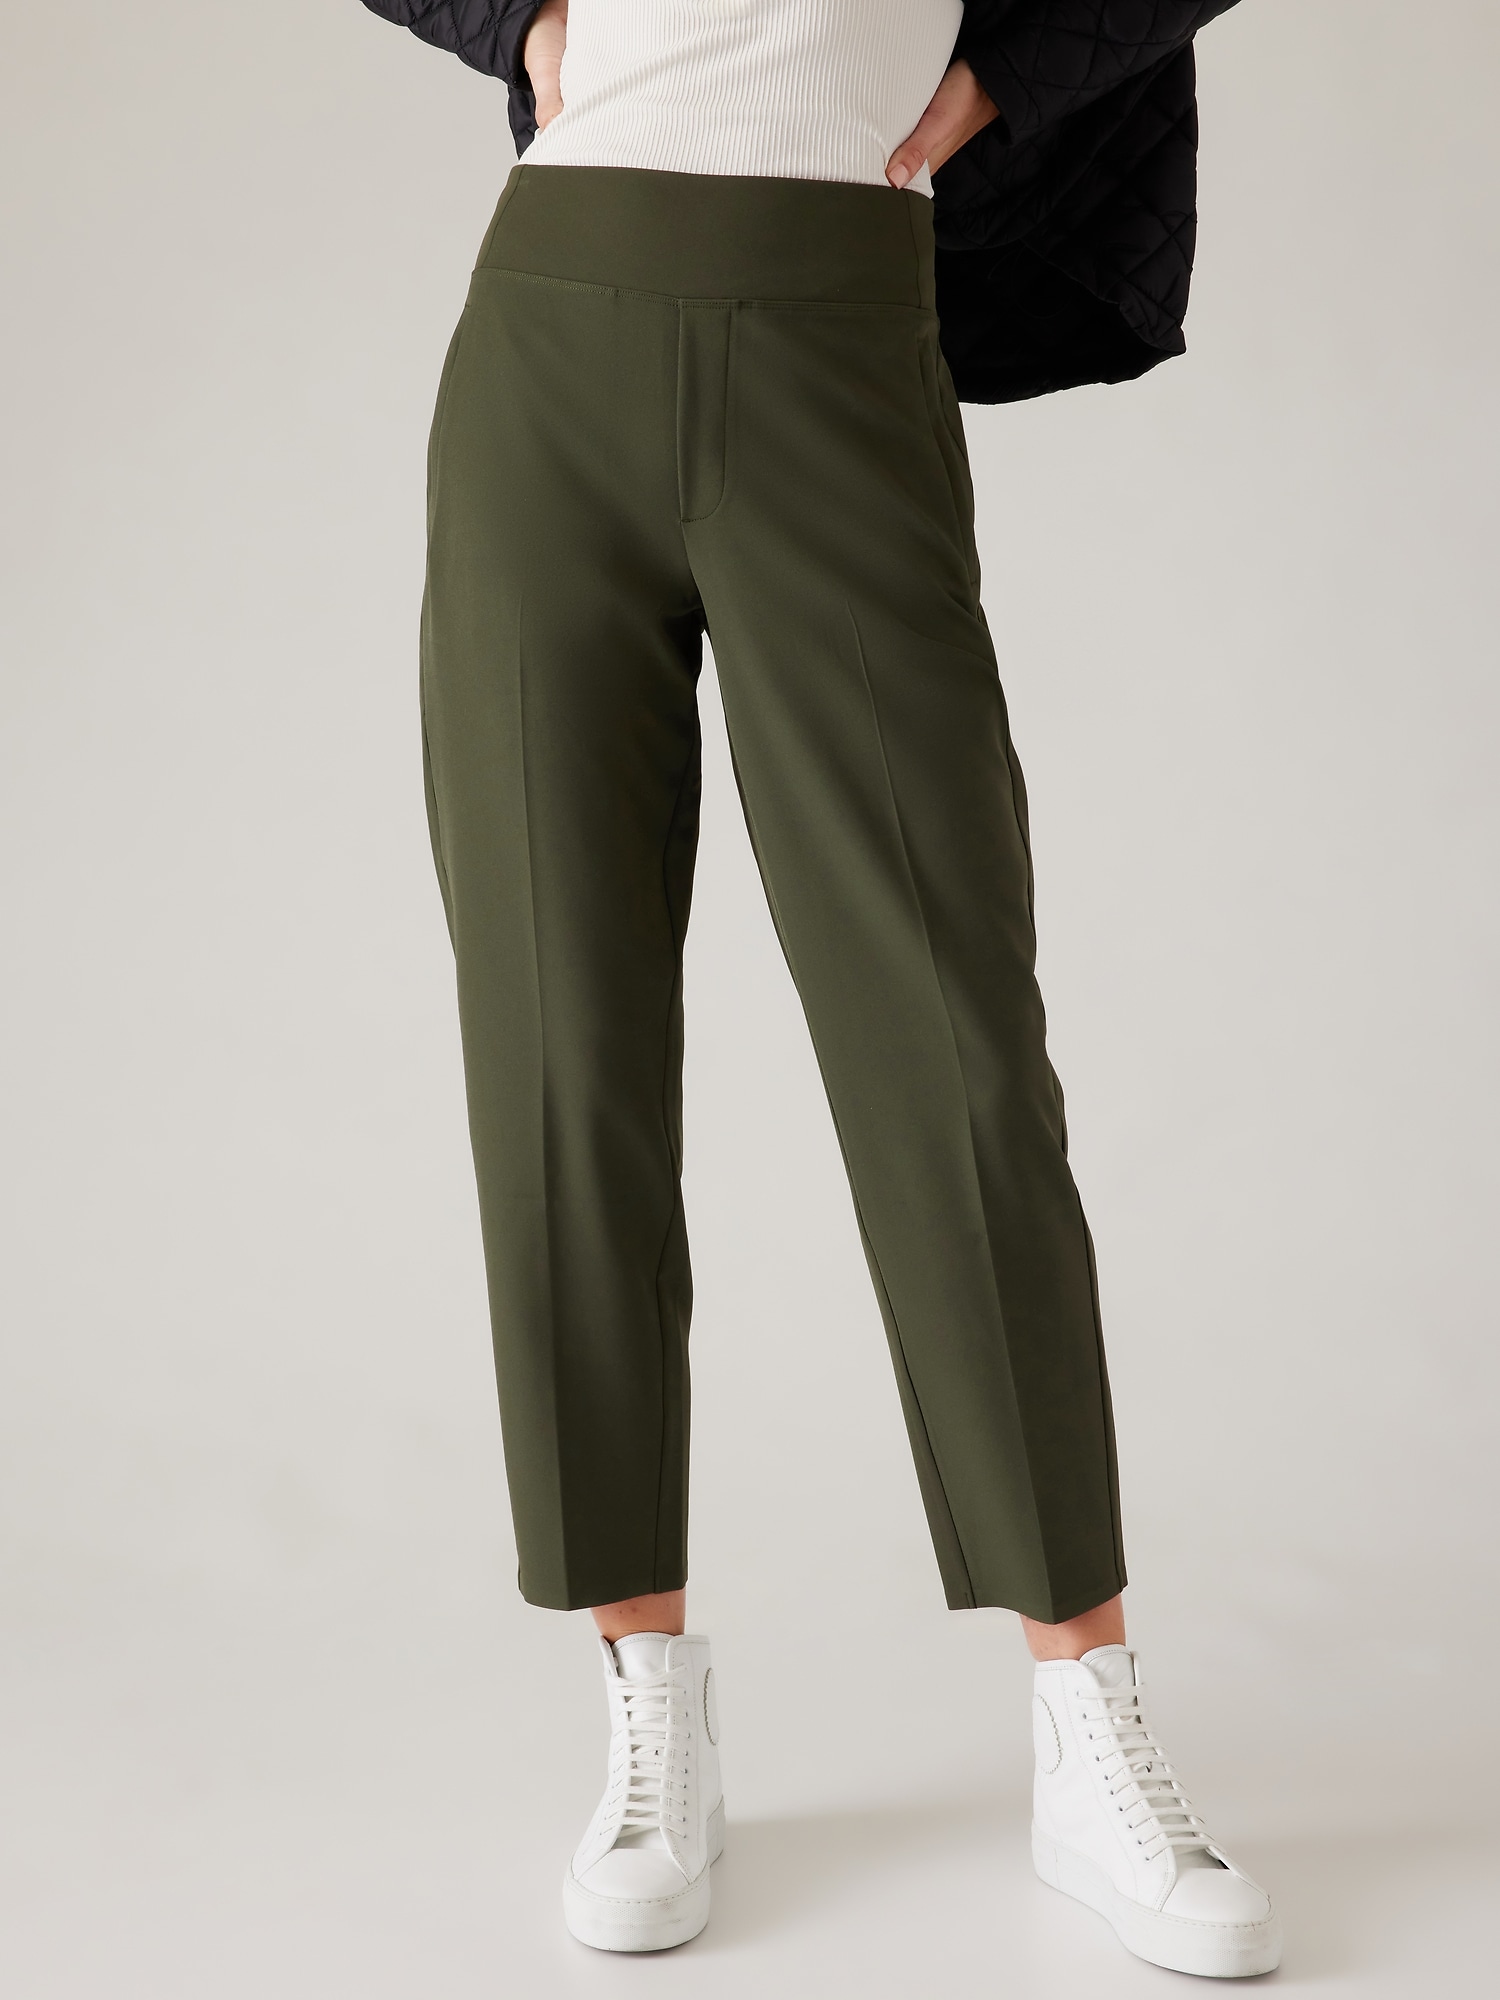 Work from Home Pants from Athleta